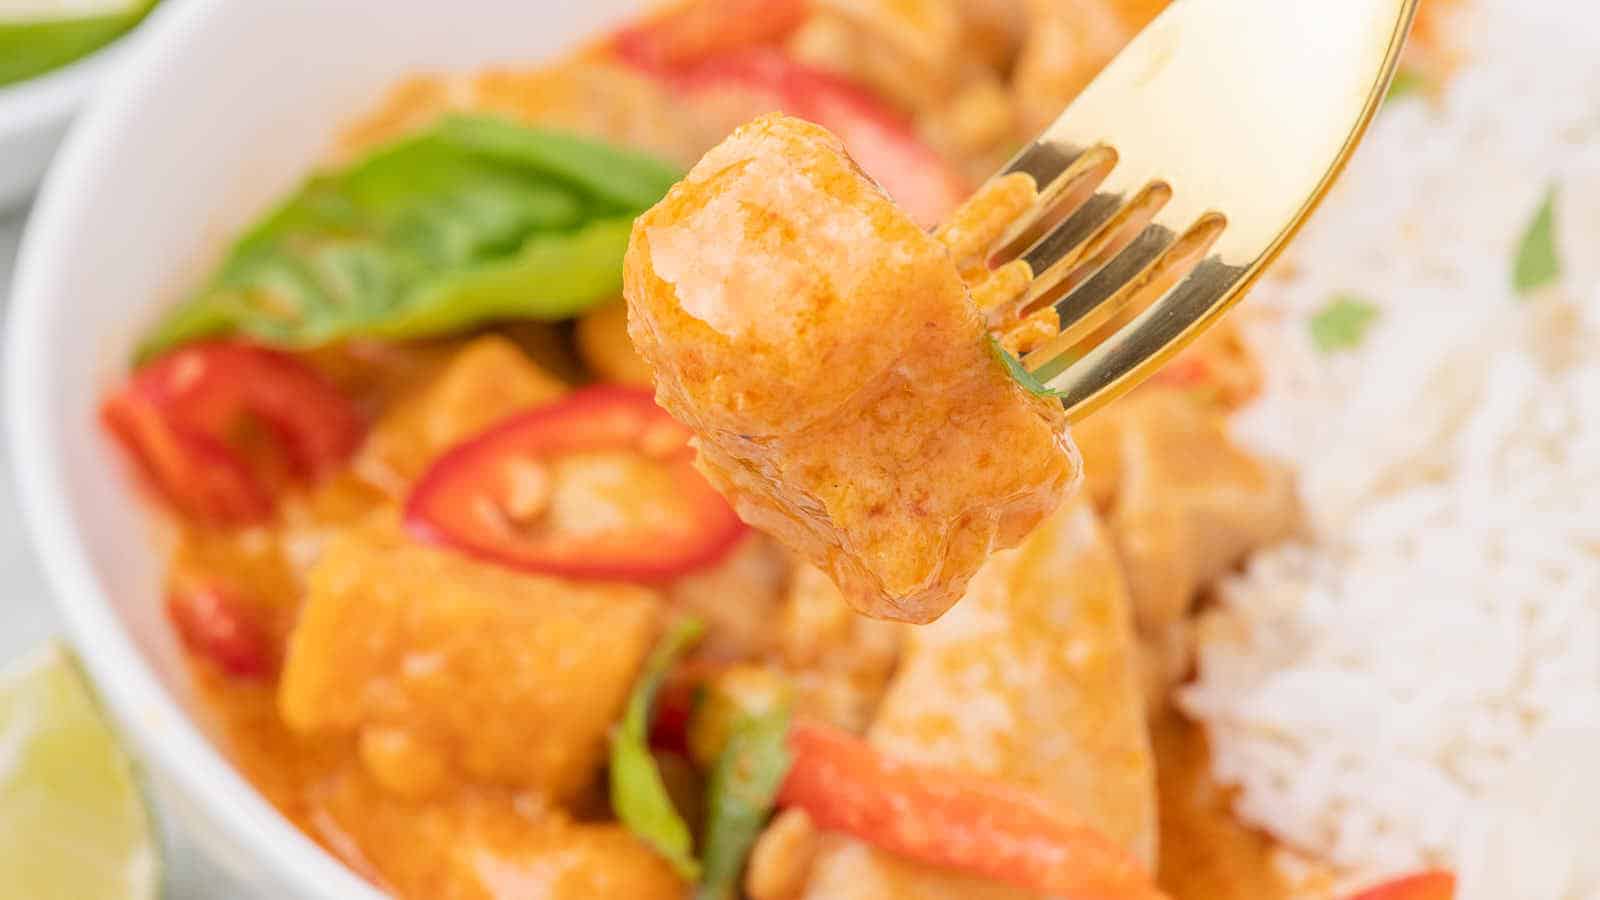 Thai Red Chicken Curry recipe by Cheerful Cook.